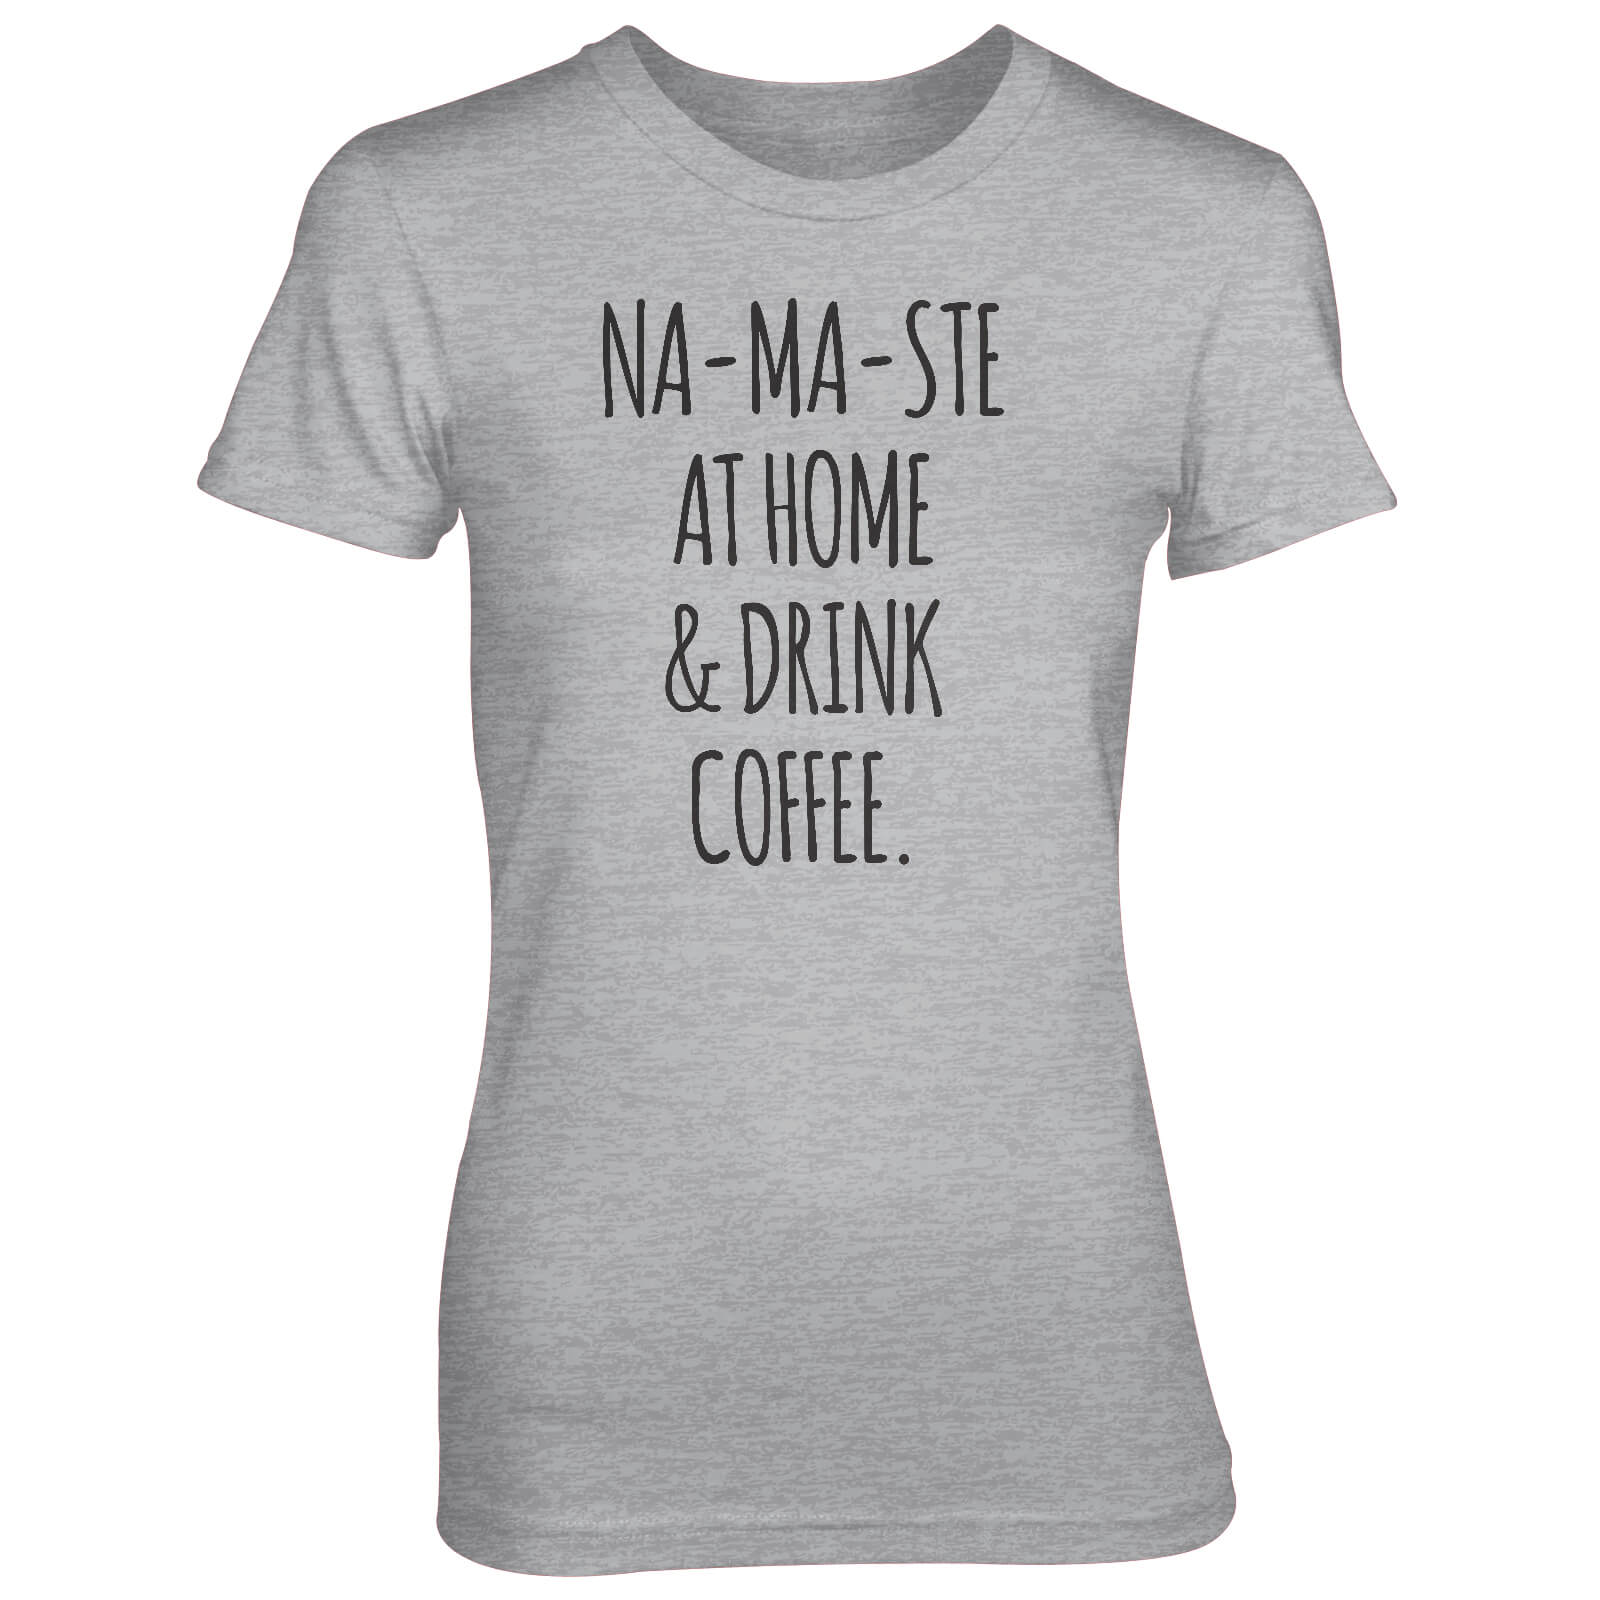 Na-Ma-Ste At Home And Drink Coffee Women's Grey T-Shirt - S - Grey